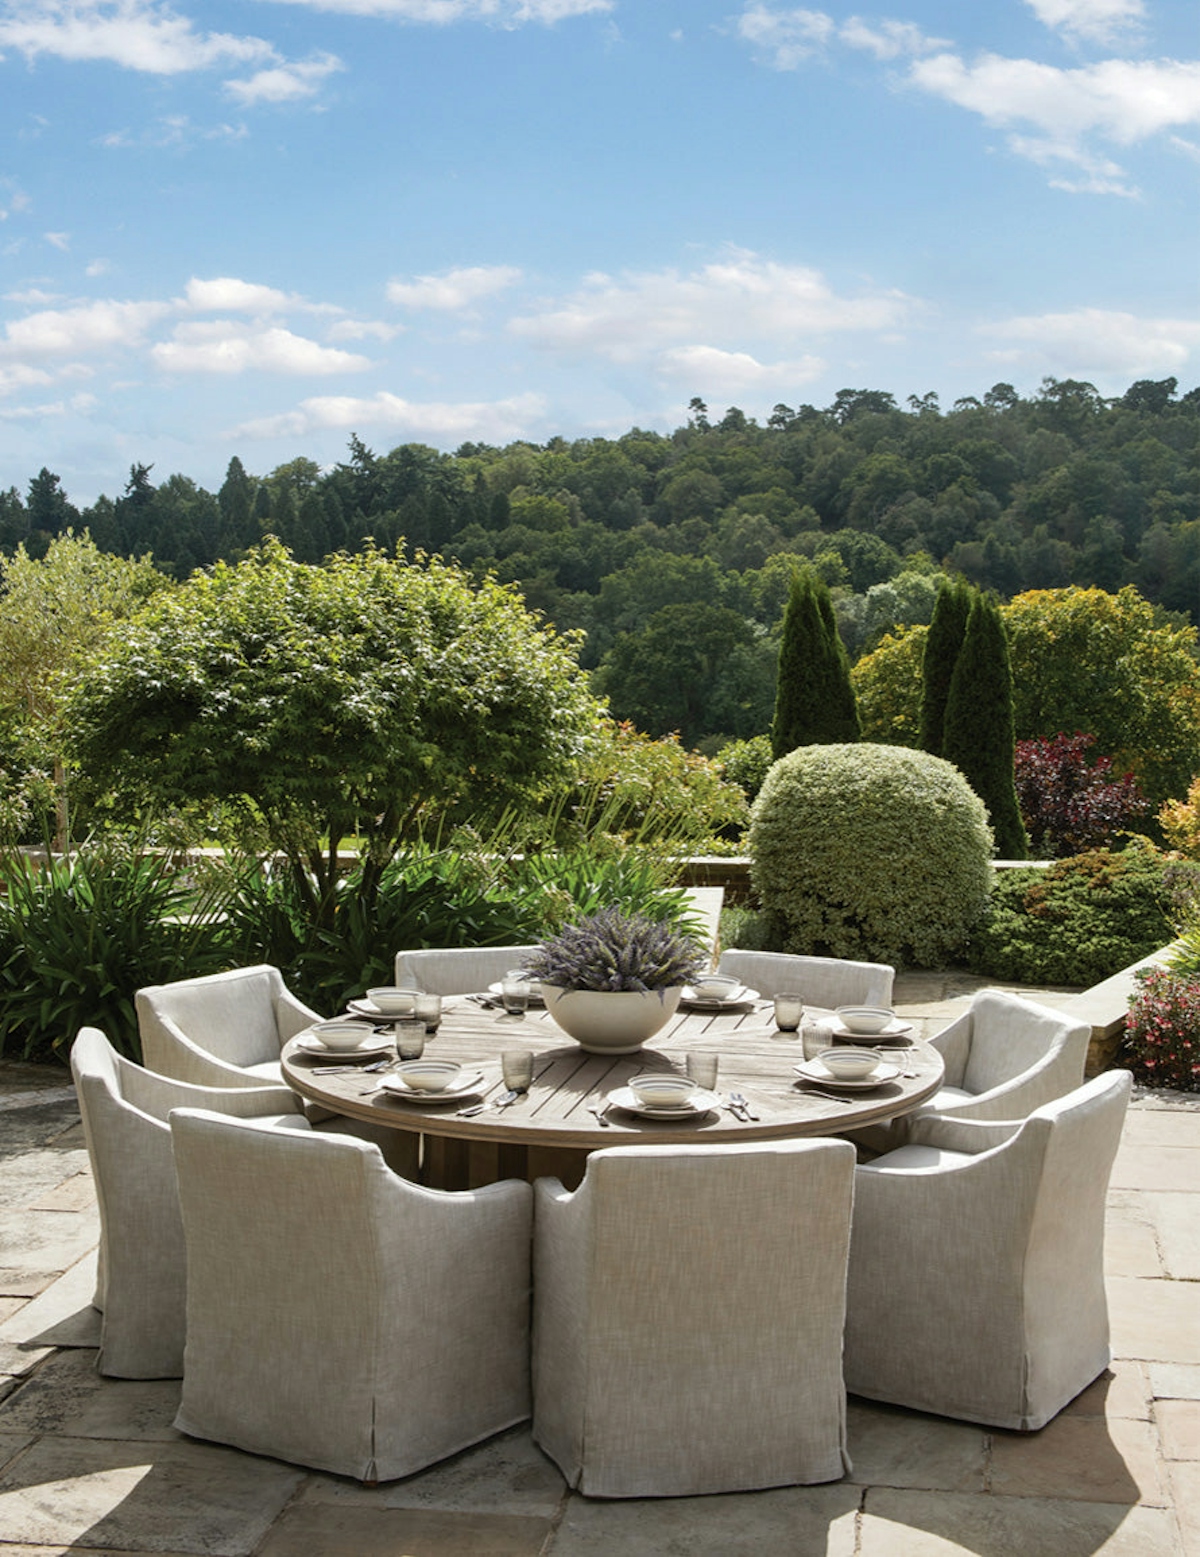 Outdoor Dining Area, Outdoor Space Ideas | Laura Hammett | Read more in The Luxurist | LuxDeco.com